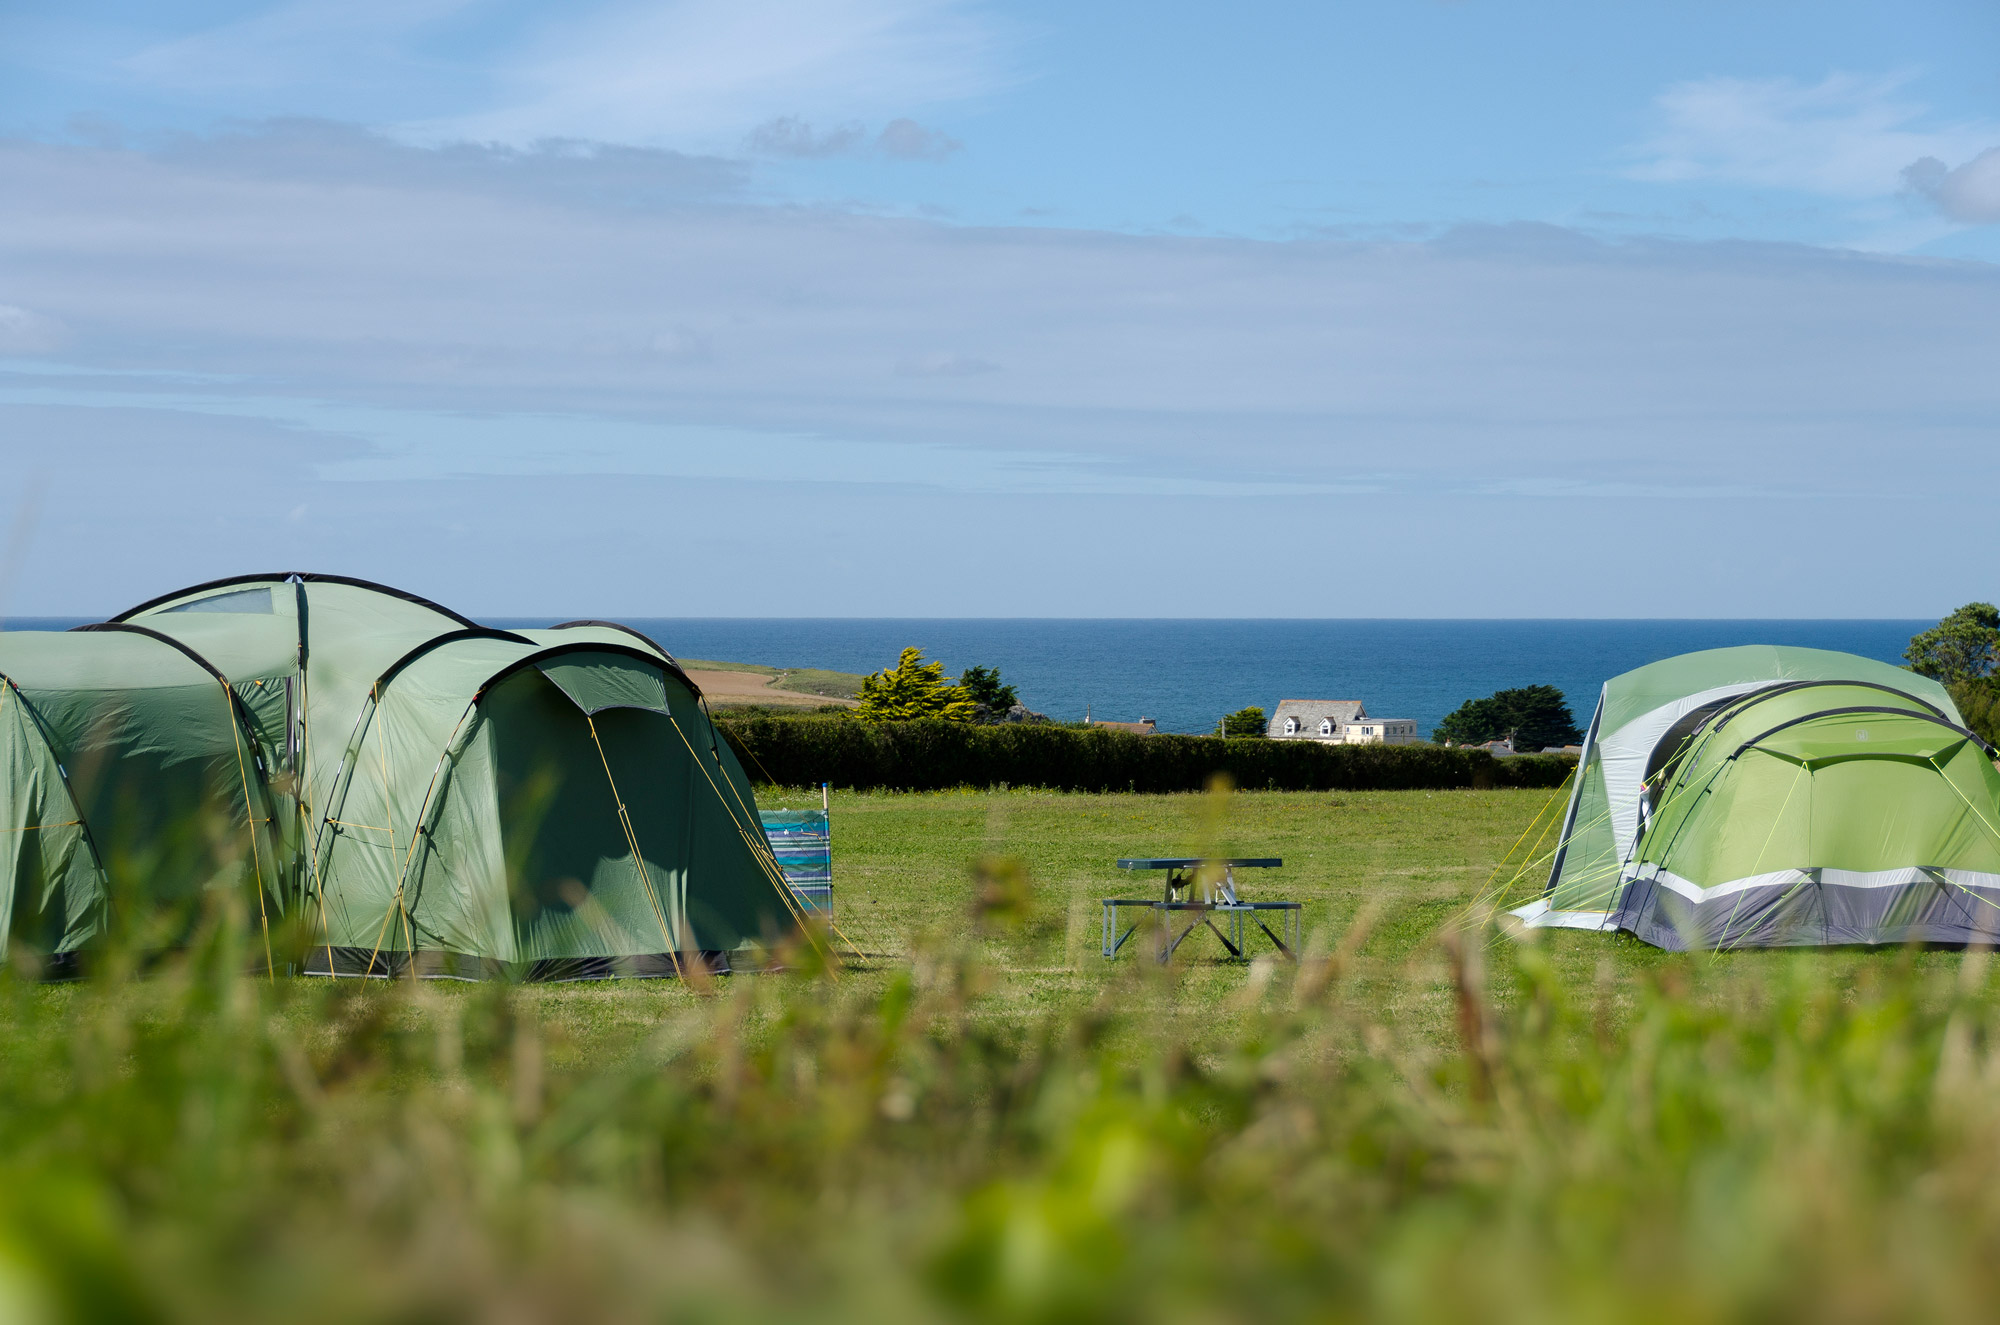 TENTS - Self contained pitches available now. To book please call direct on 01841 520022.